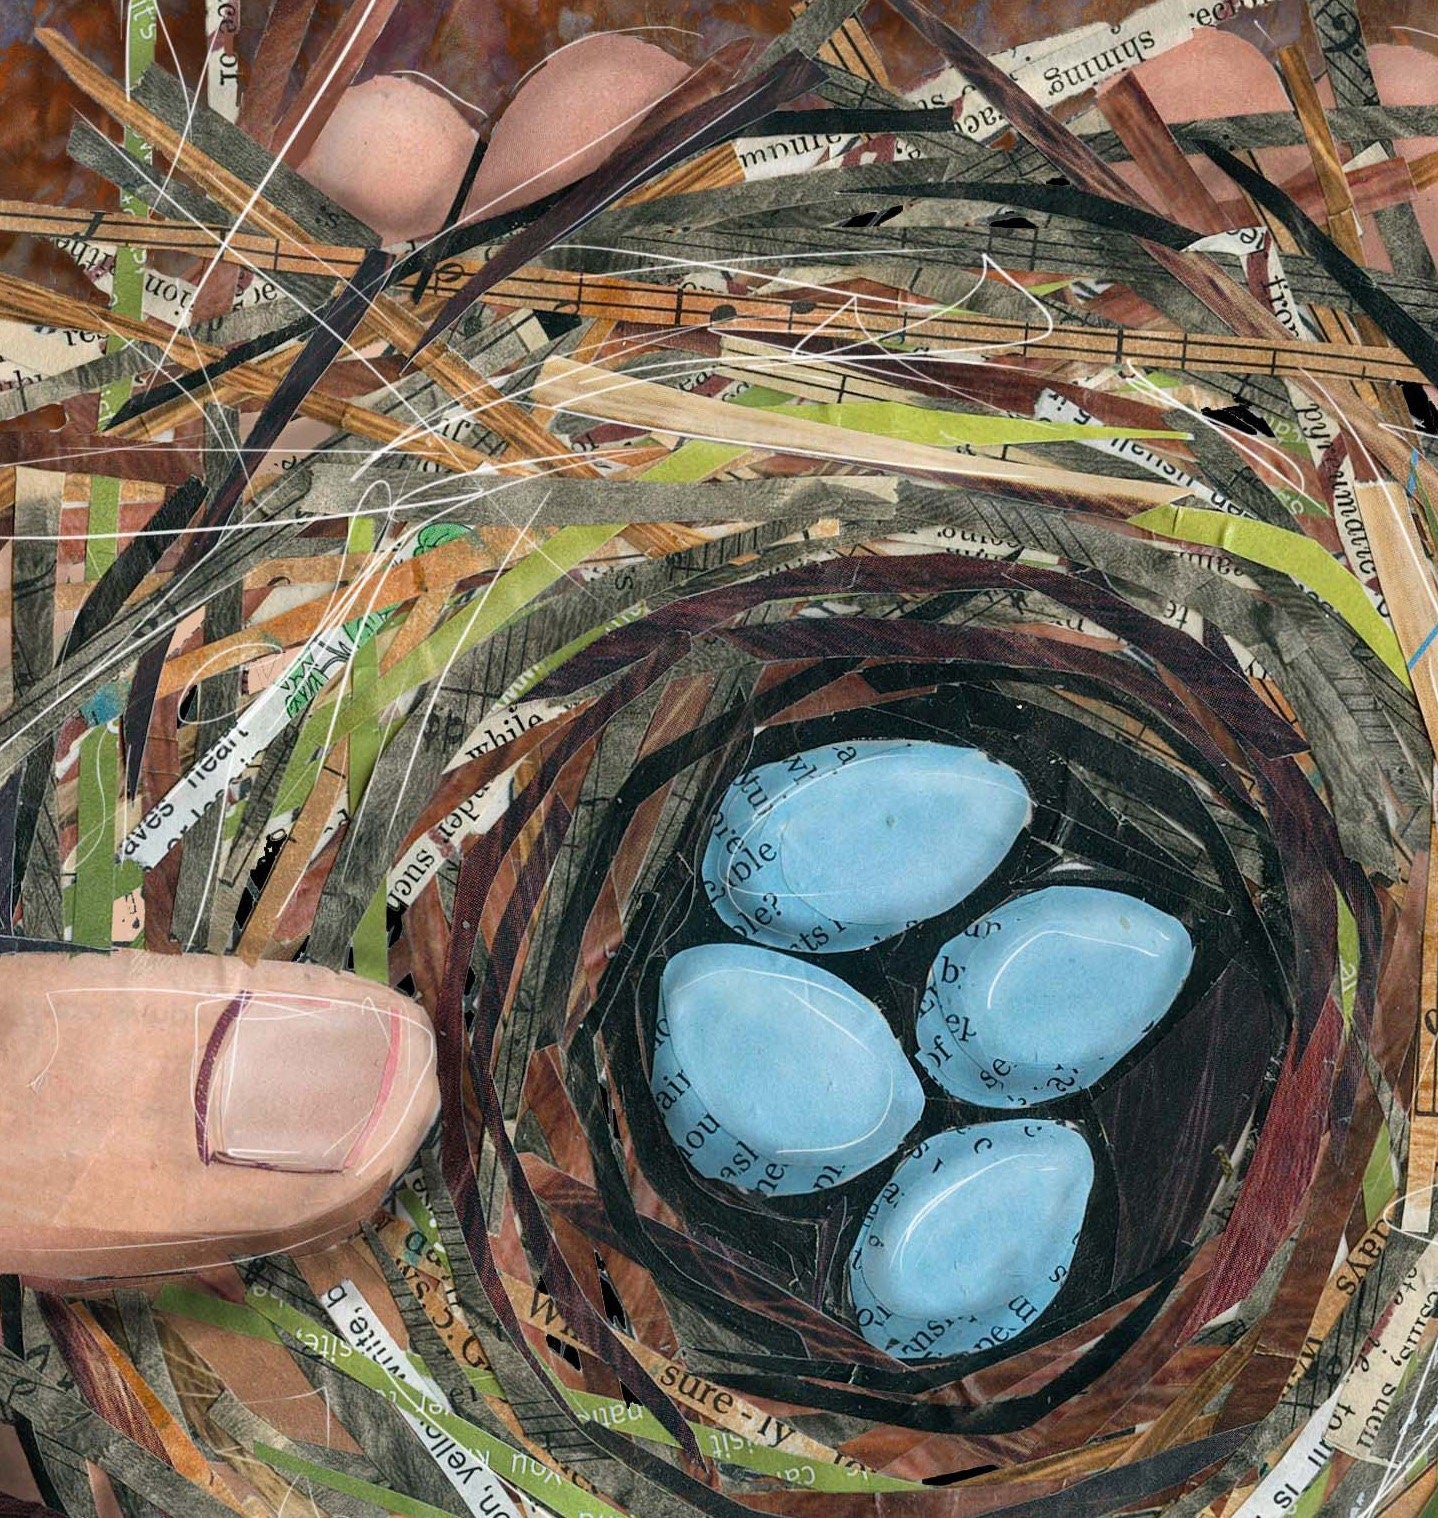 8x10 Art Print of a mixed media collage of a hand holding a robin nest with four blue eggs in it, nature, birds, motherhood, baby